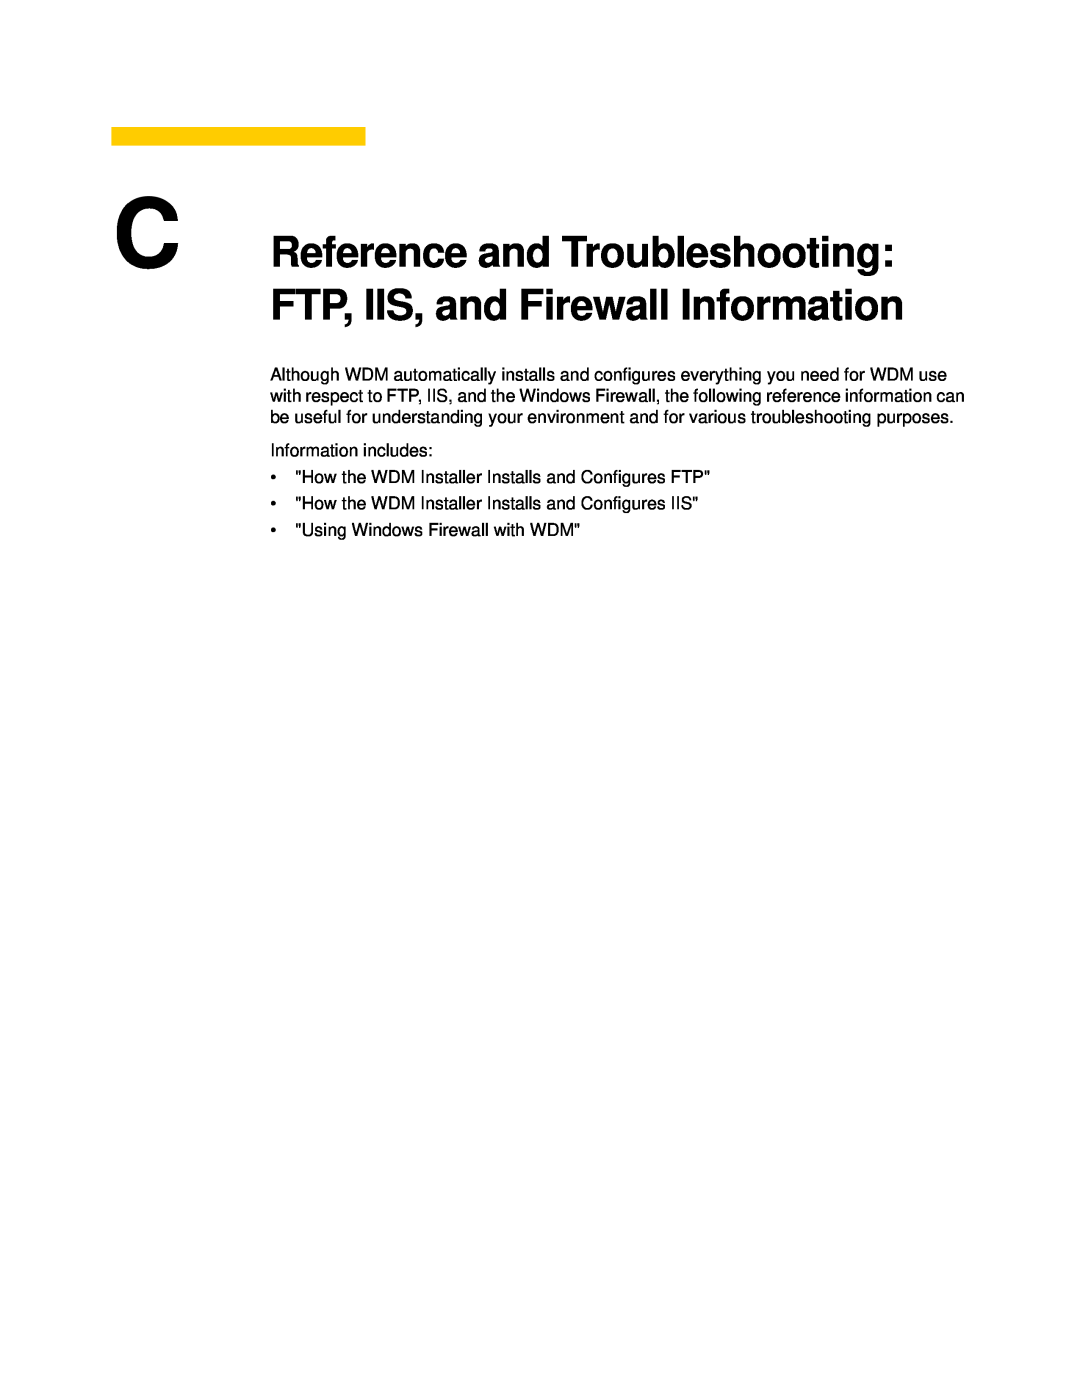 Wyse Technology 883886-01 manual C Reference and Troubleshooting FTP, IIS, and Firewall Information 